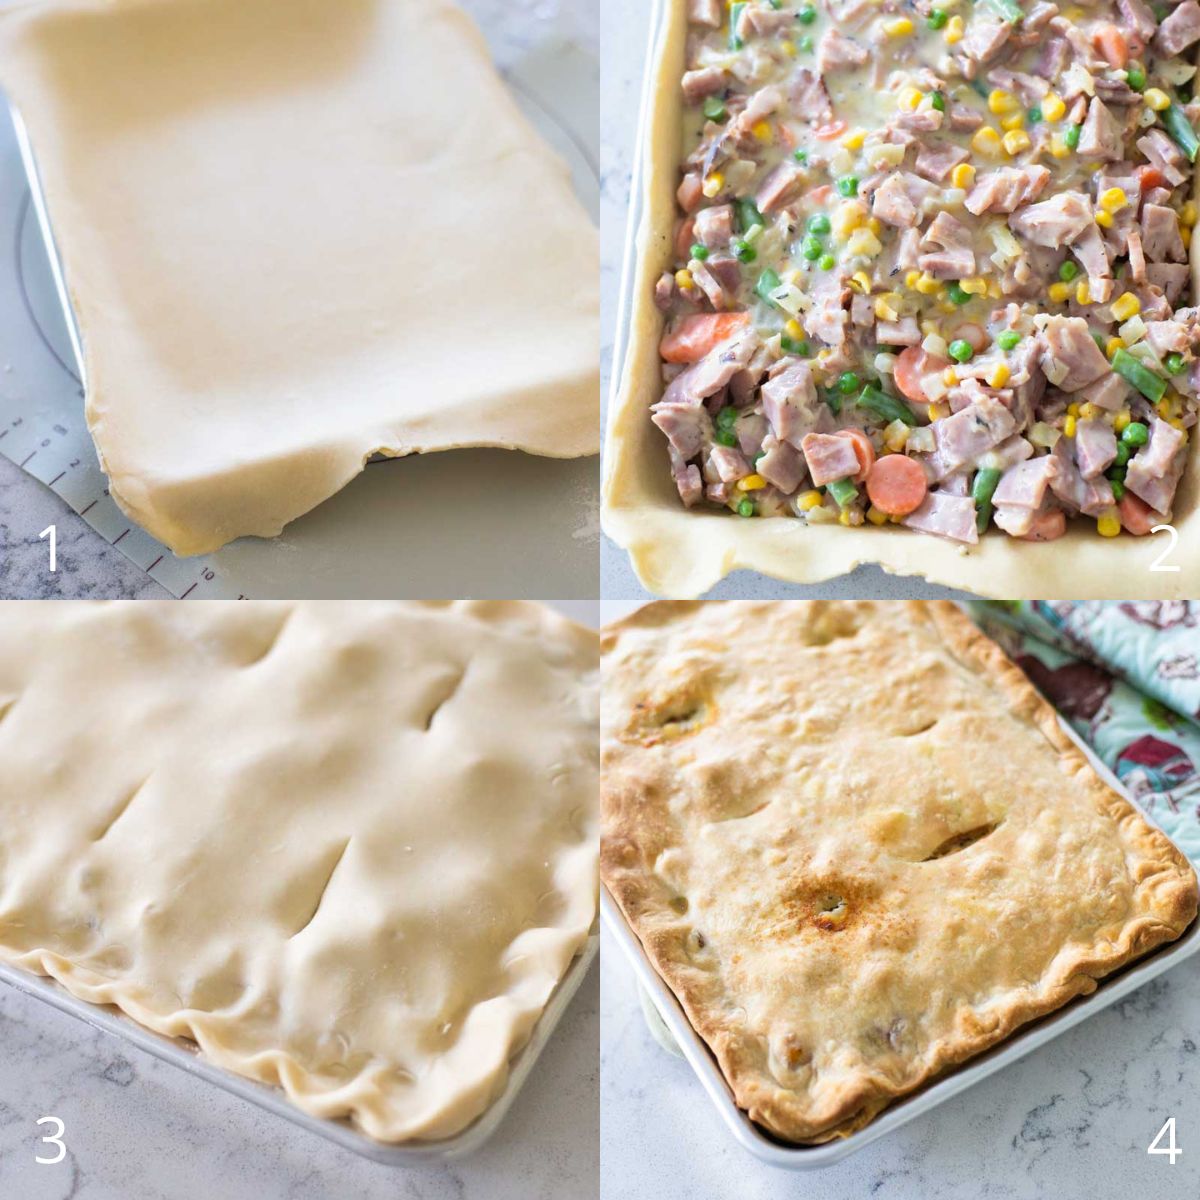 The step by step photos show how to assemble the pie before baking.